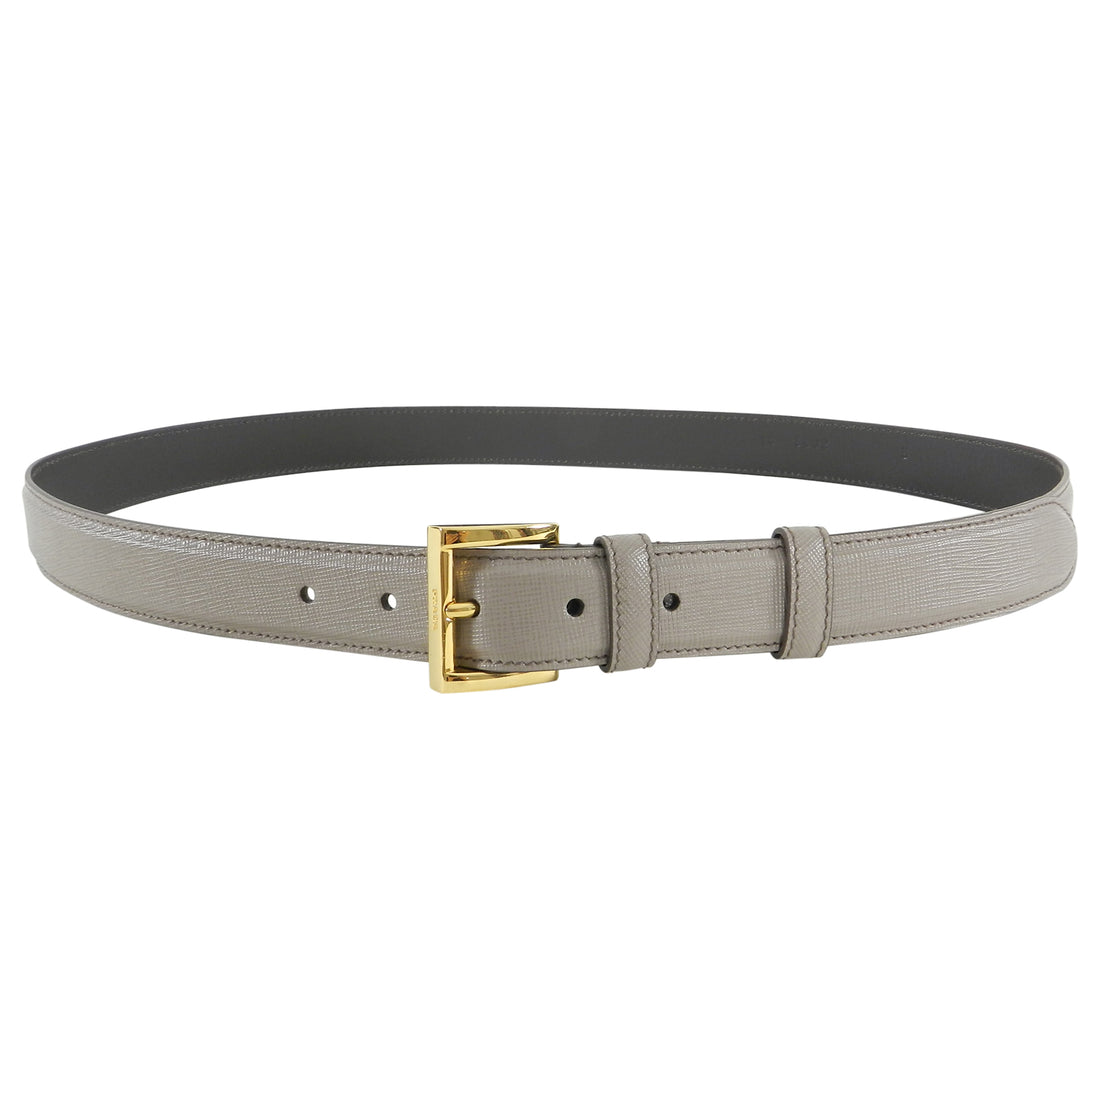 Prada Taupe Saffiano Leather Belt with Gold Buckle – I MISS YOU VINTAGE